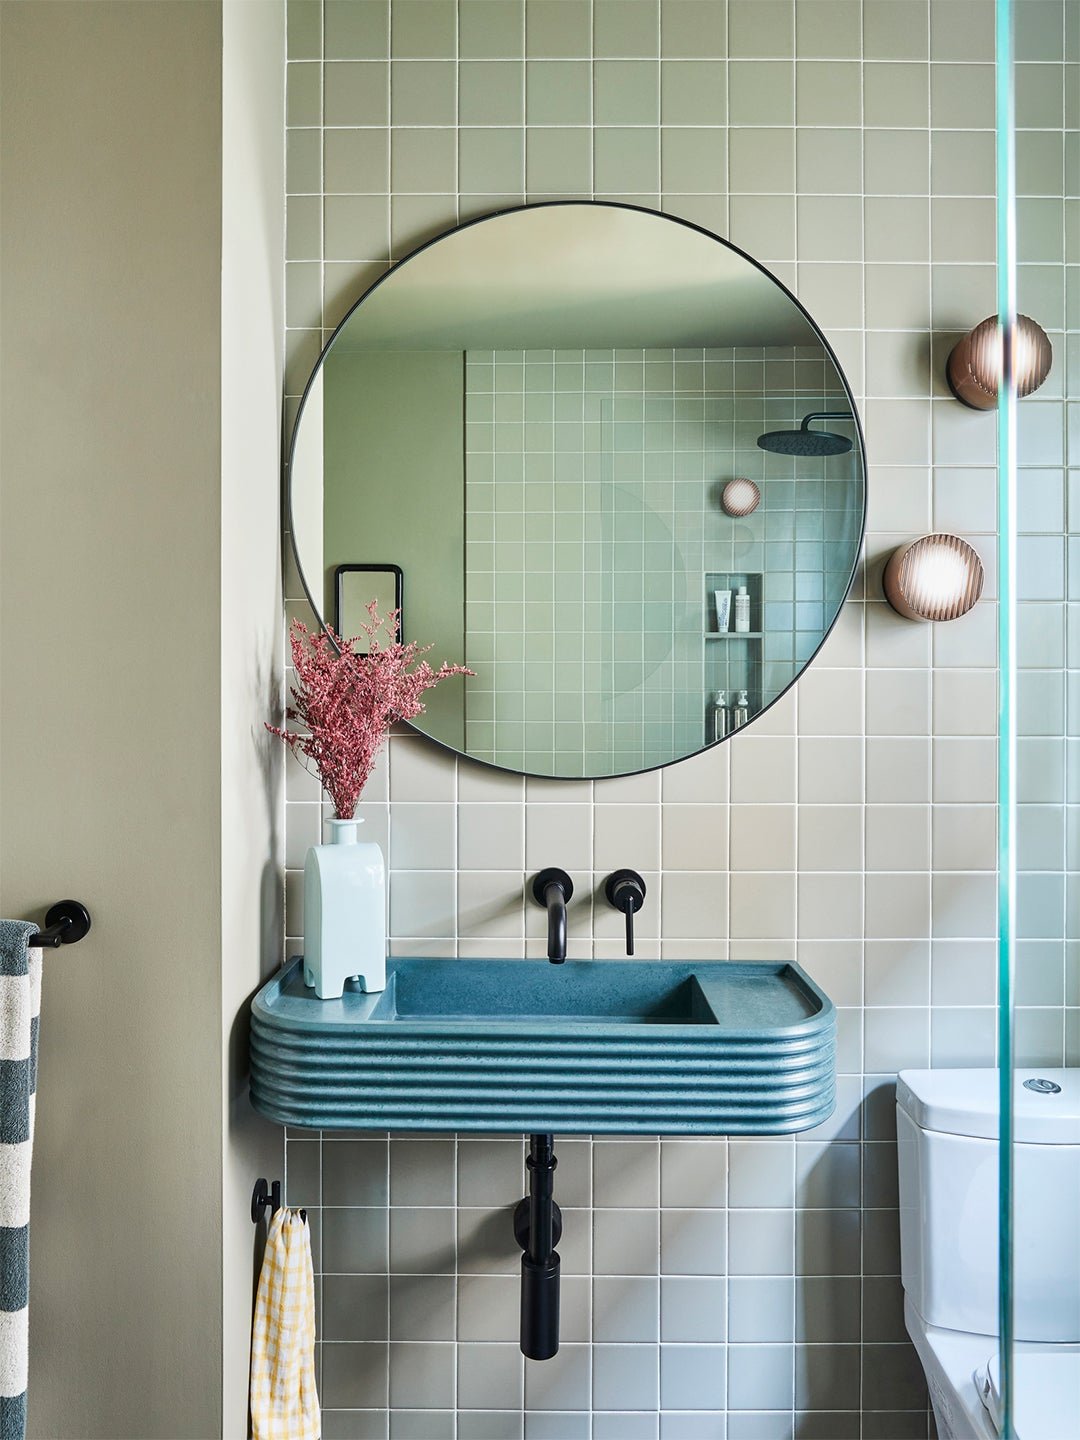 Shower Mood Lighting Is a Thing, and It Gives This Jersey City Bathroom Spa Vibes